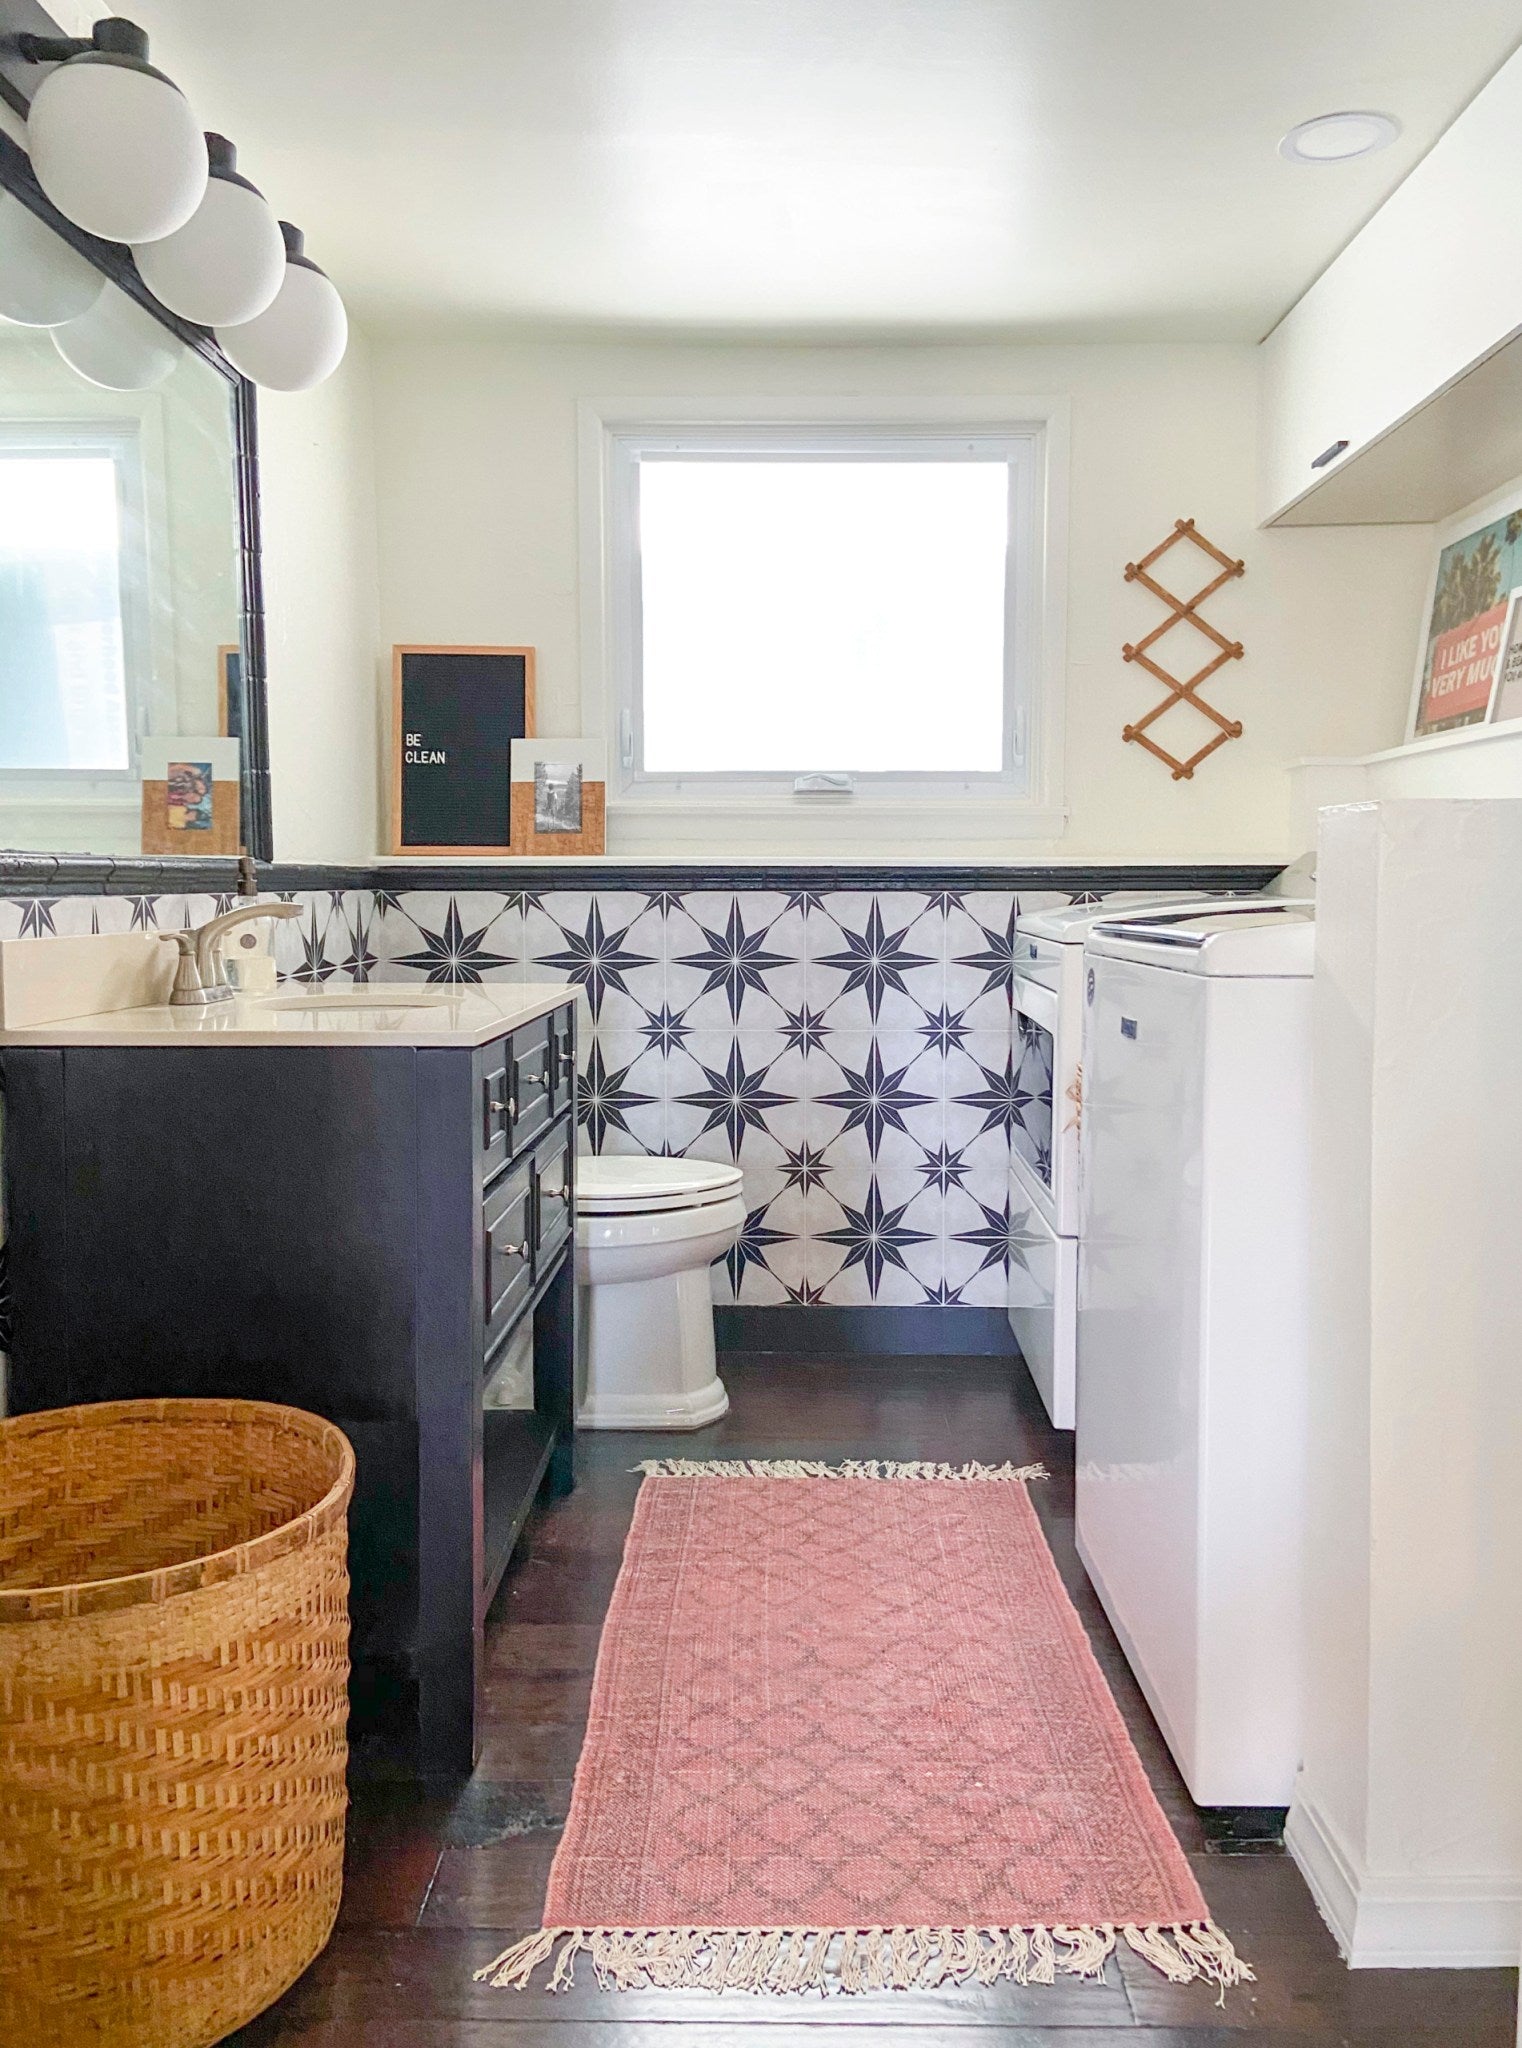 Midwest Eclectic’s Laundry Room Makeover